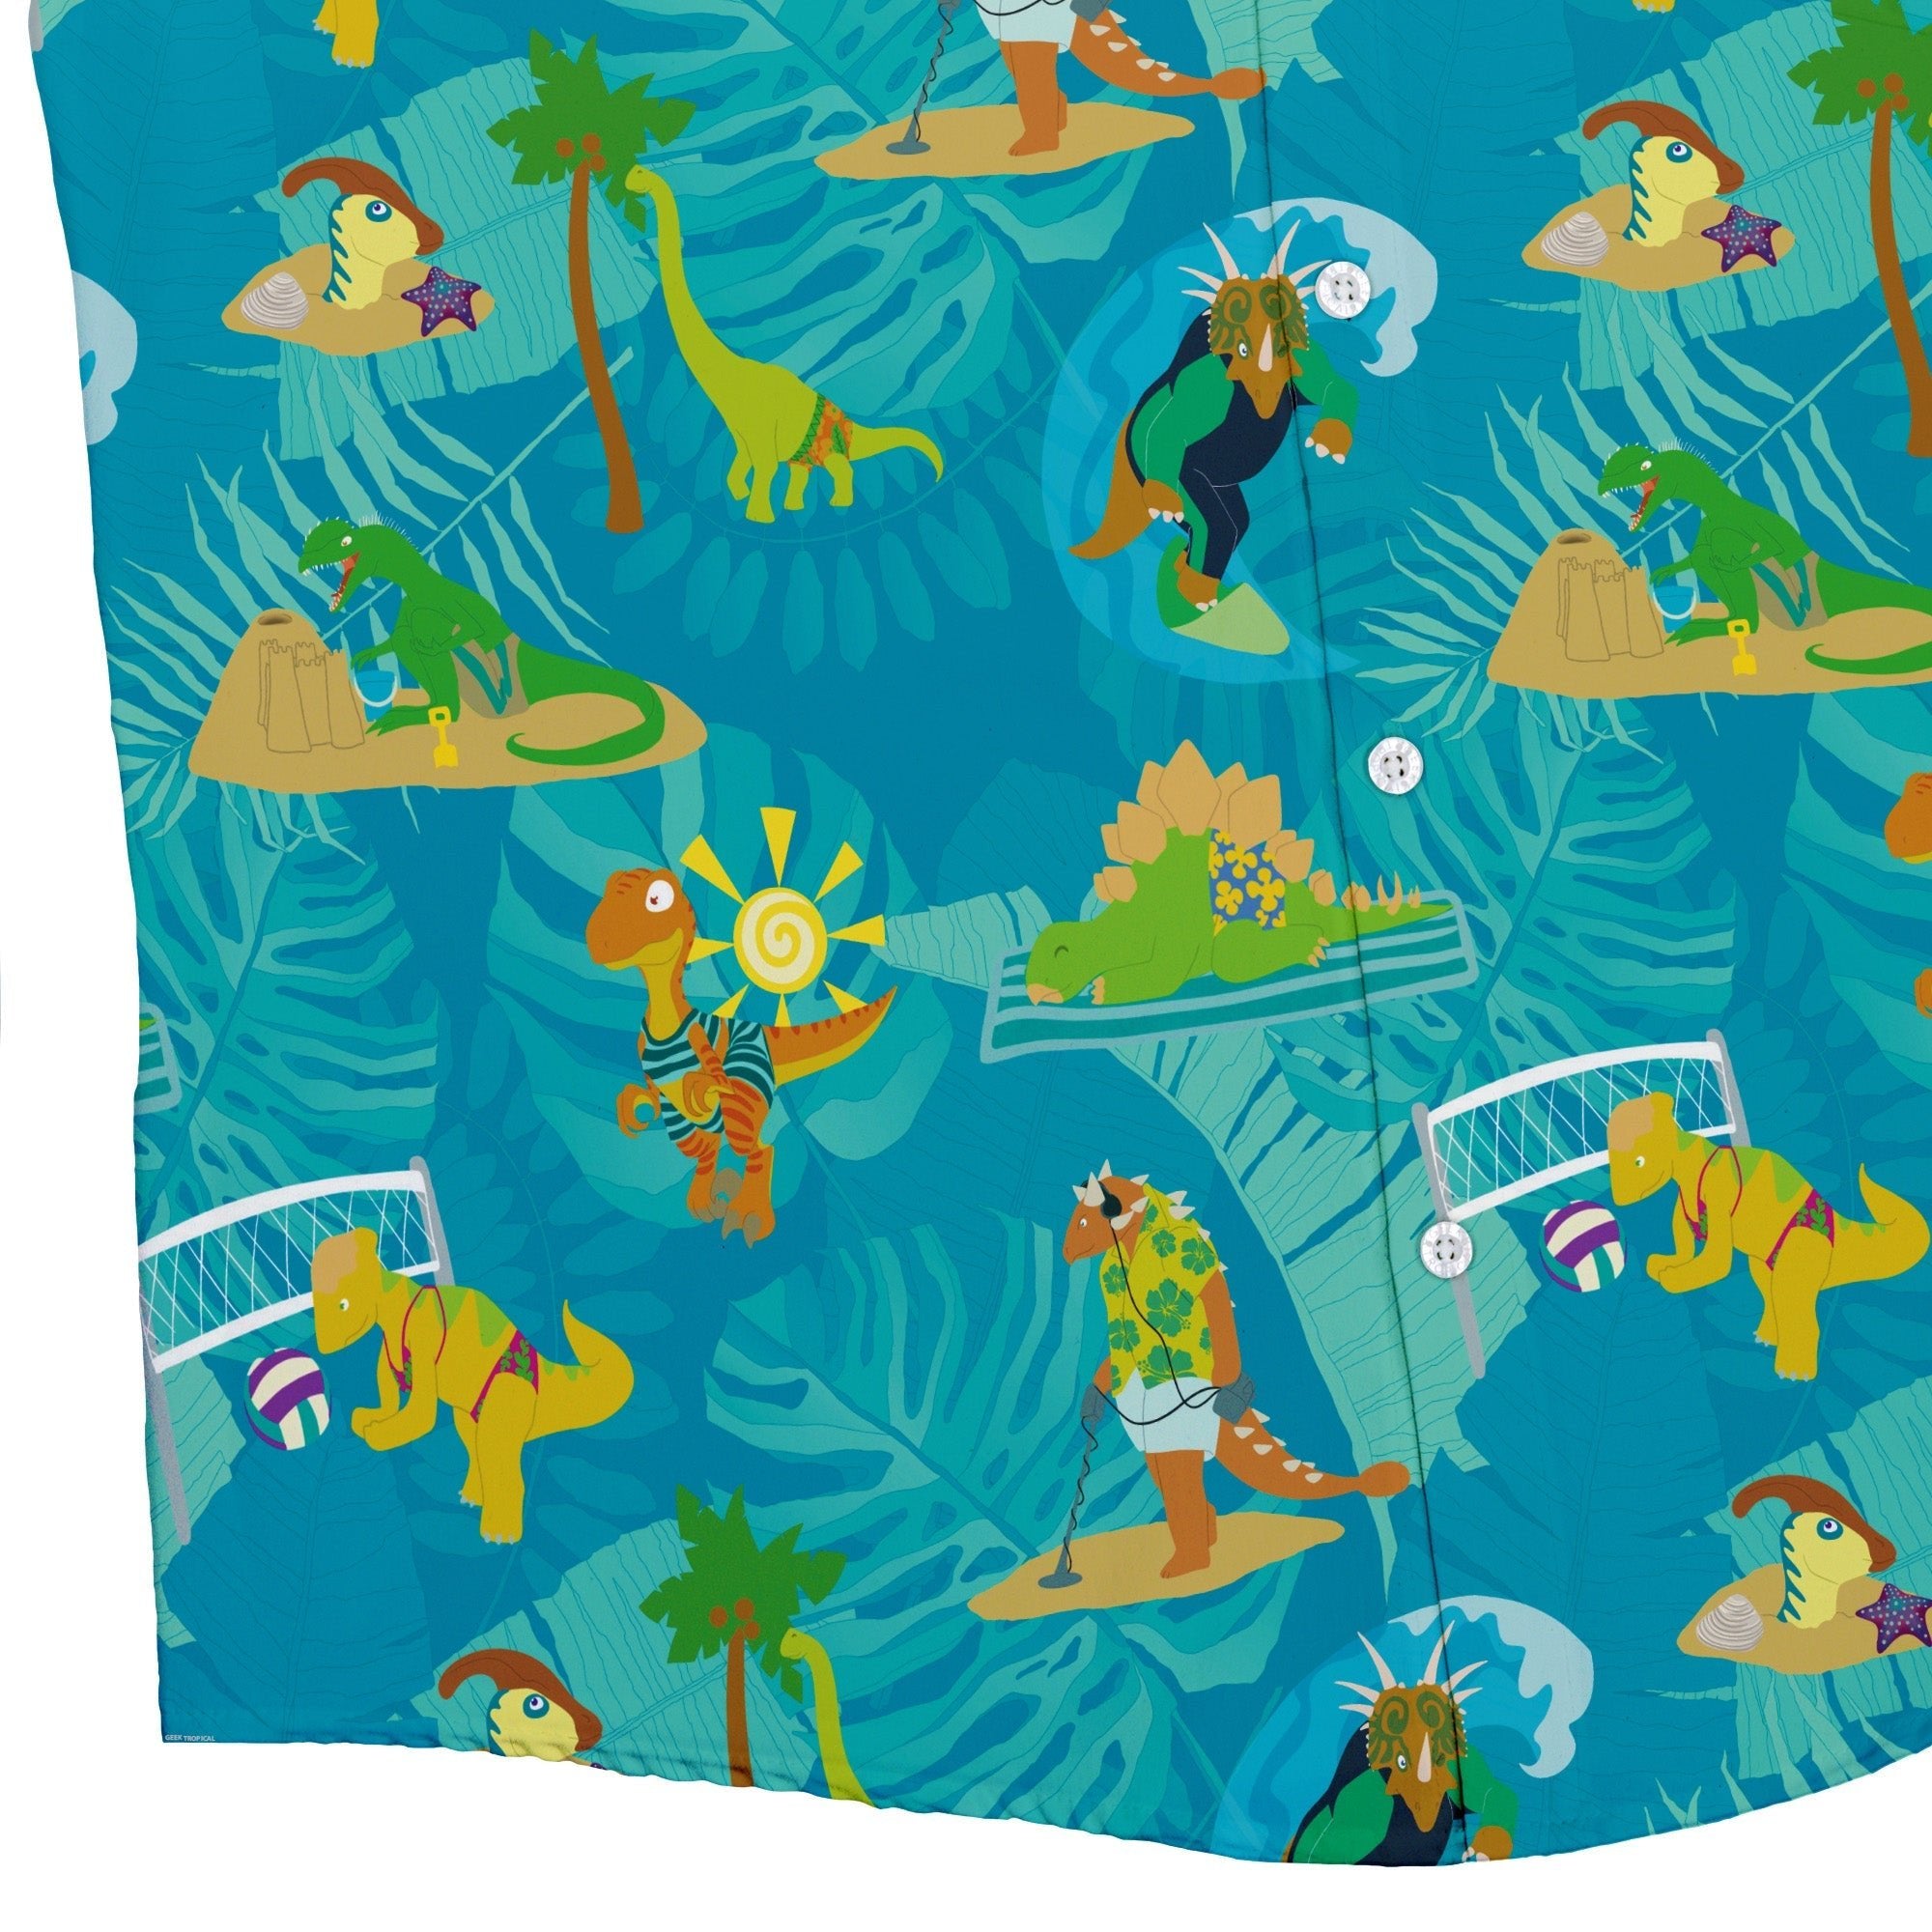 Dino Beach Party Button Up Shirt - adult sizing - Designs by Nathan - dinosaur print